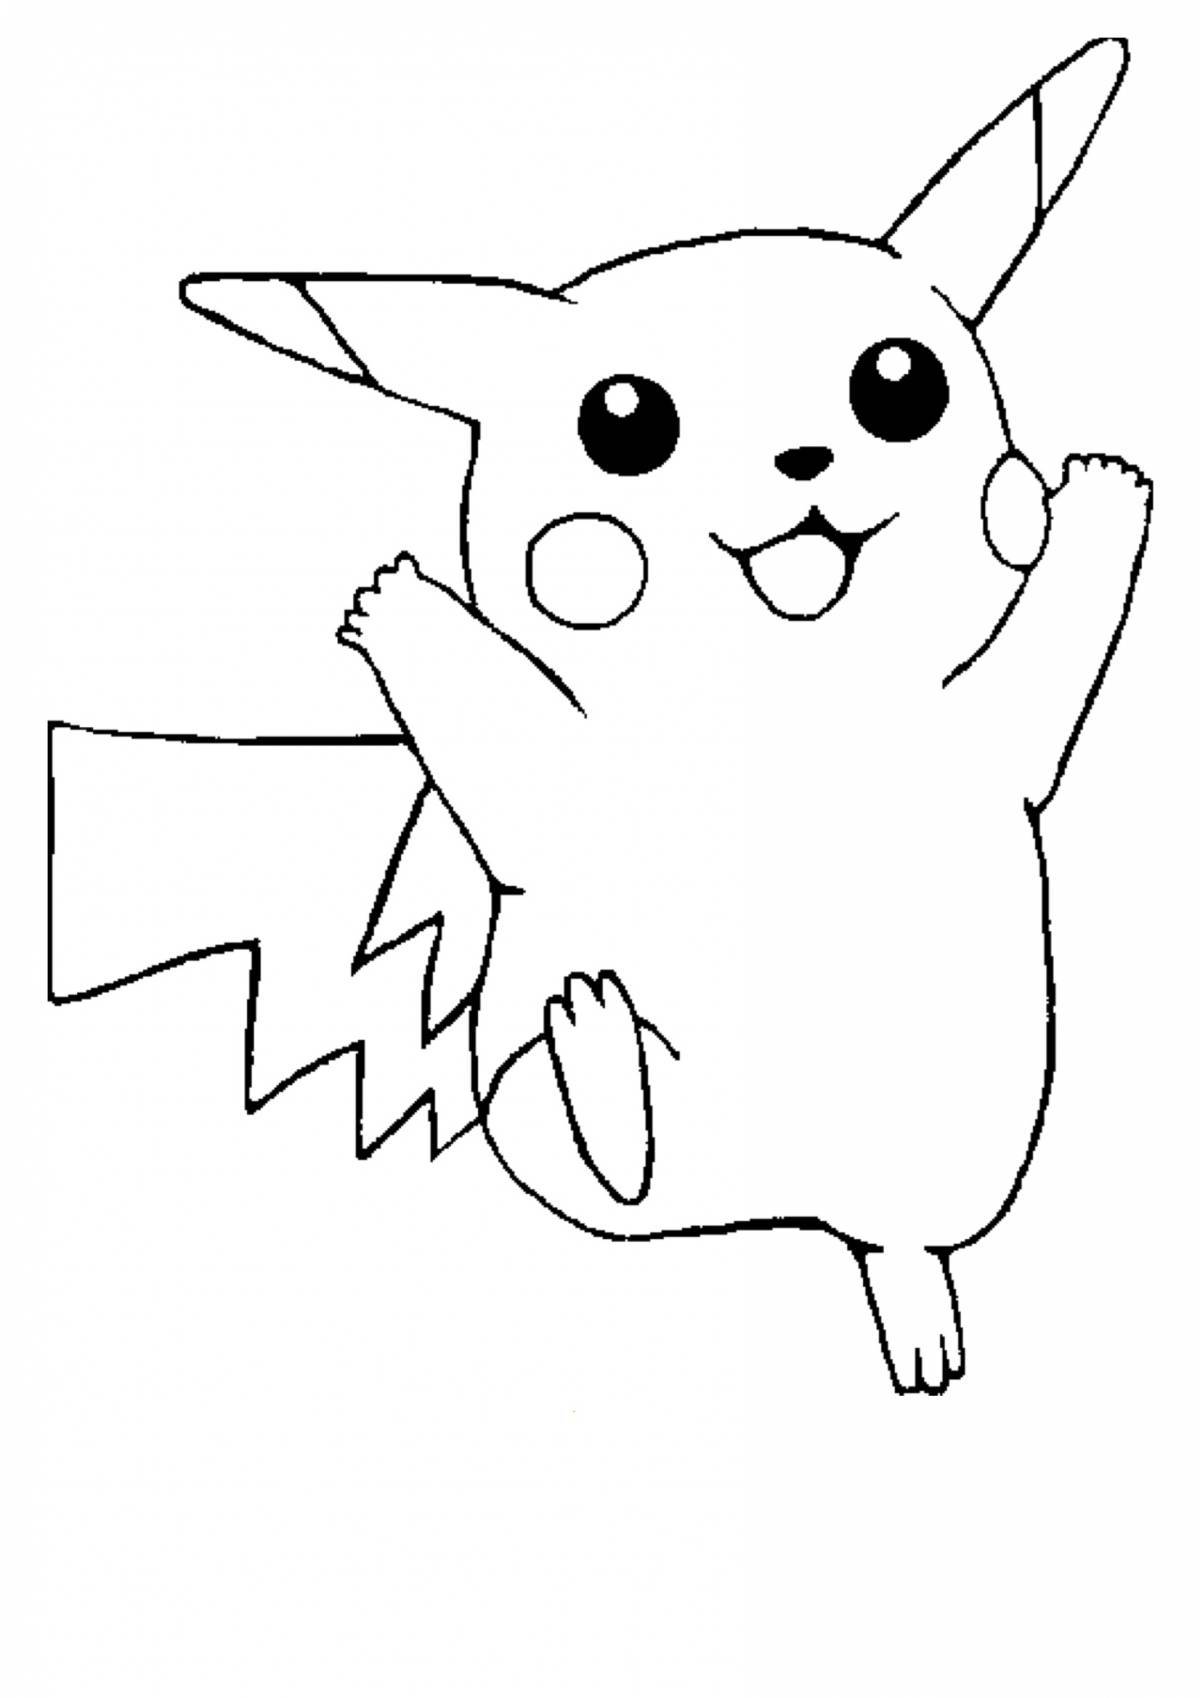 Exciting pikachu coloring book